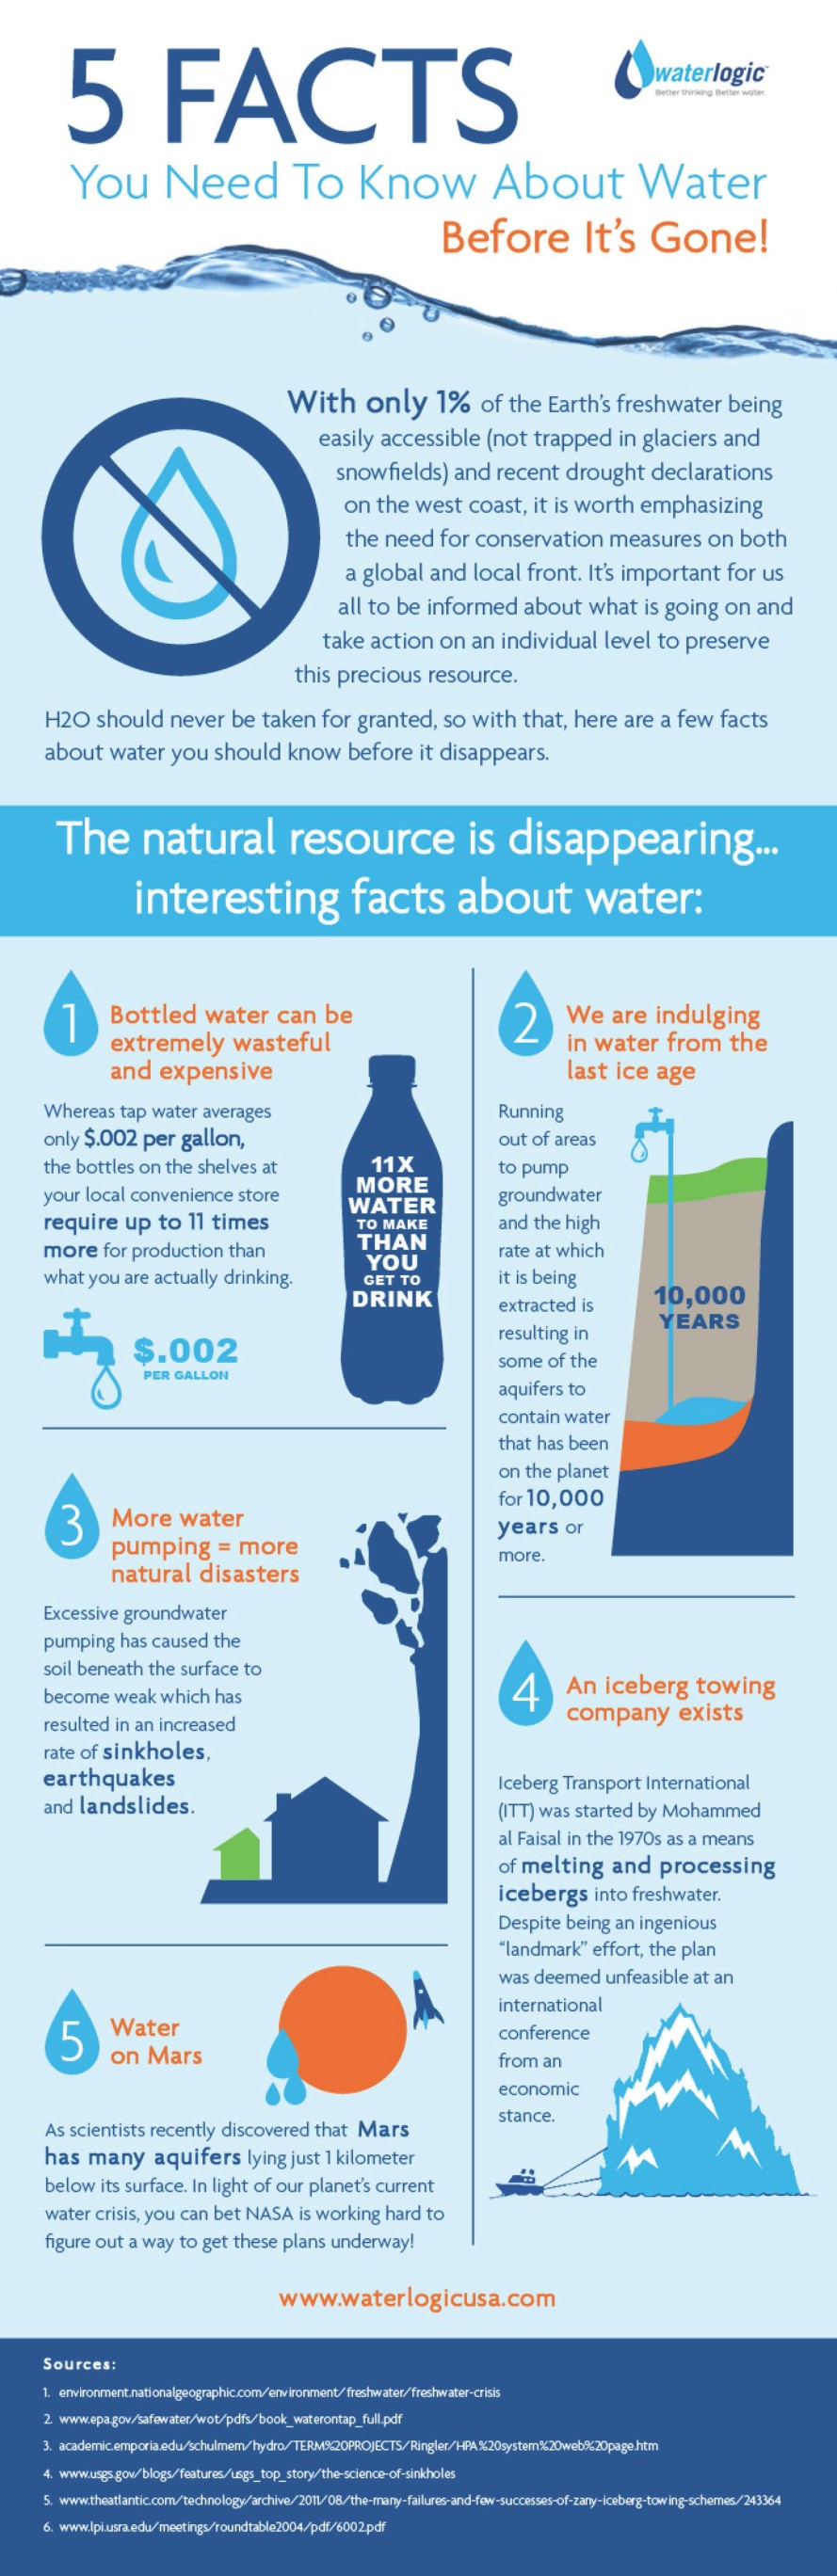 5-facts-about-disappearing-water-889x2737